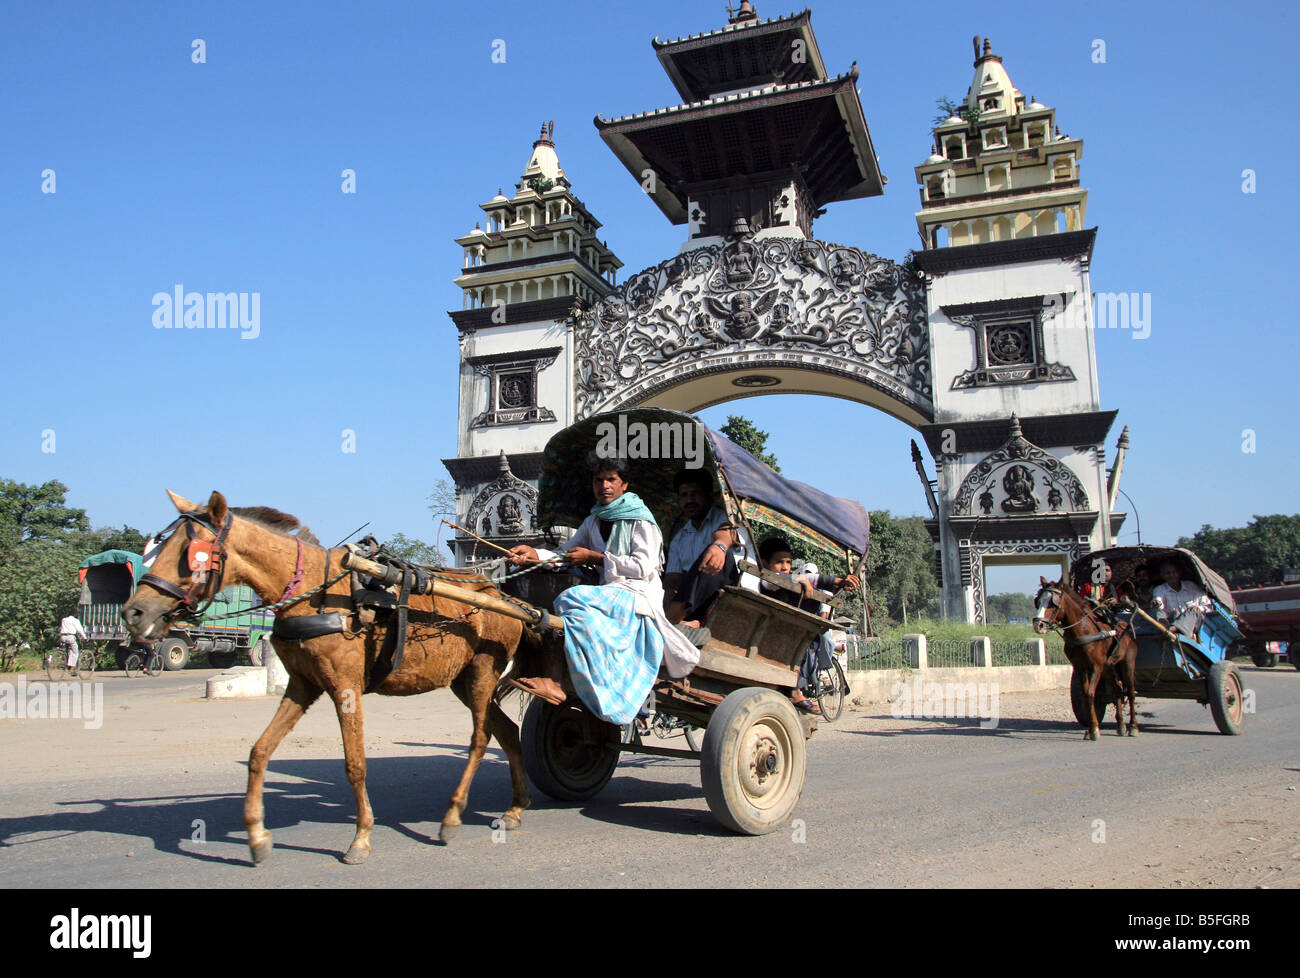 Nepal+India: Gate marks the border between India and Nepal at the nepalese town of Birgunj Stock Photo